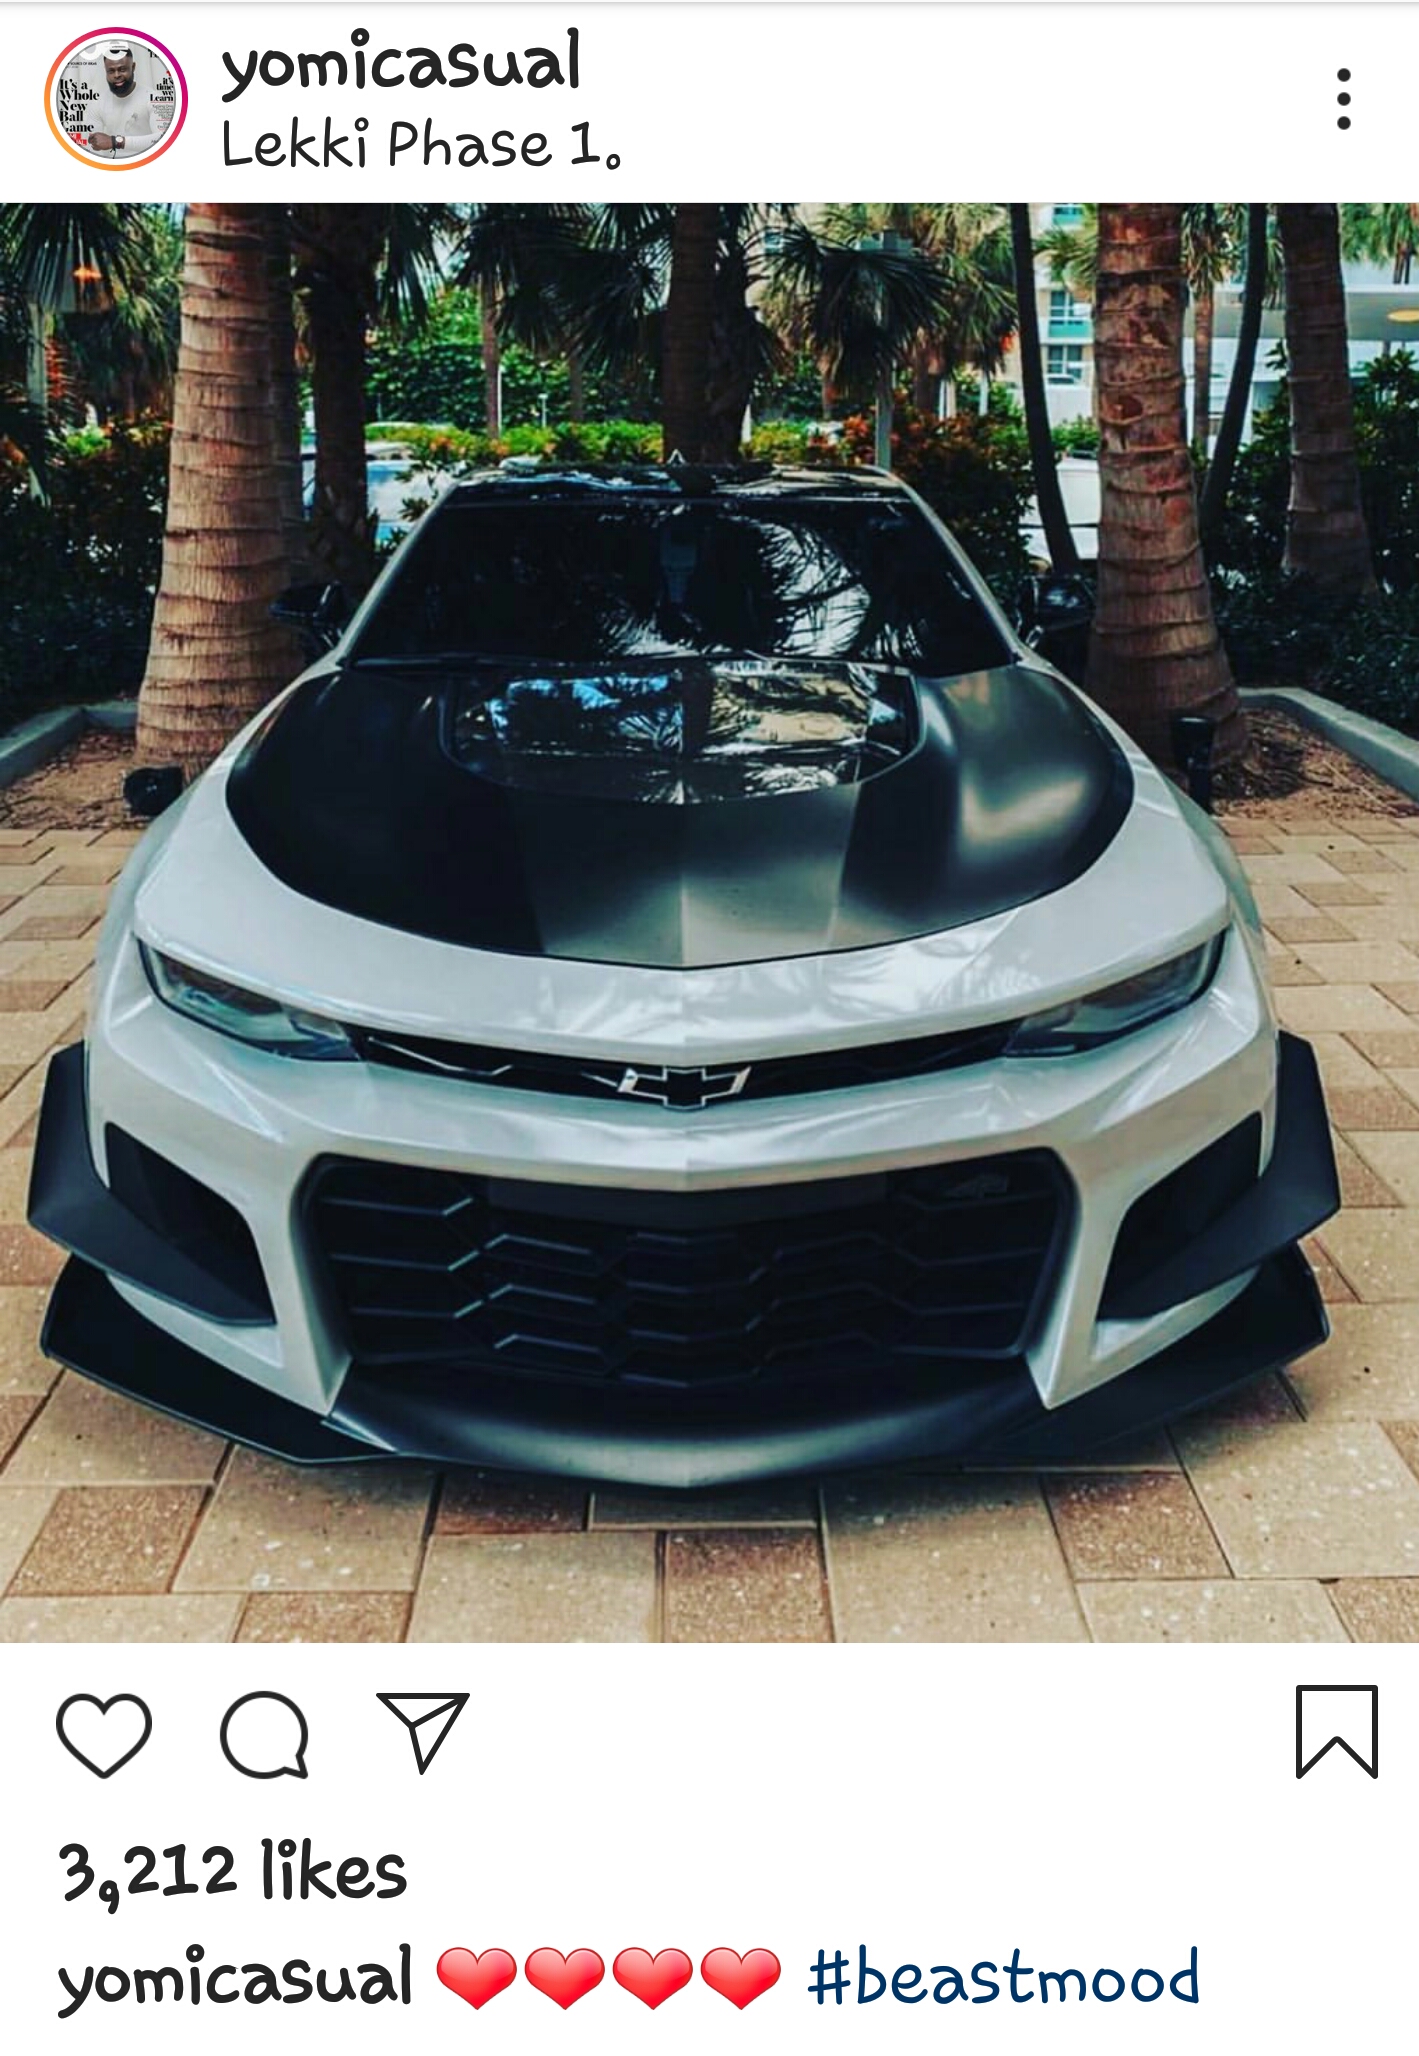 Yomi Casual acquires new whip to welcome new baby